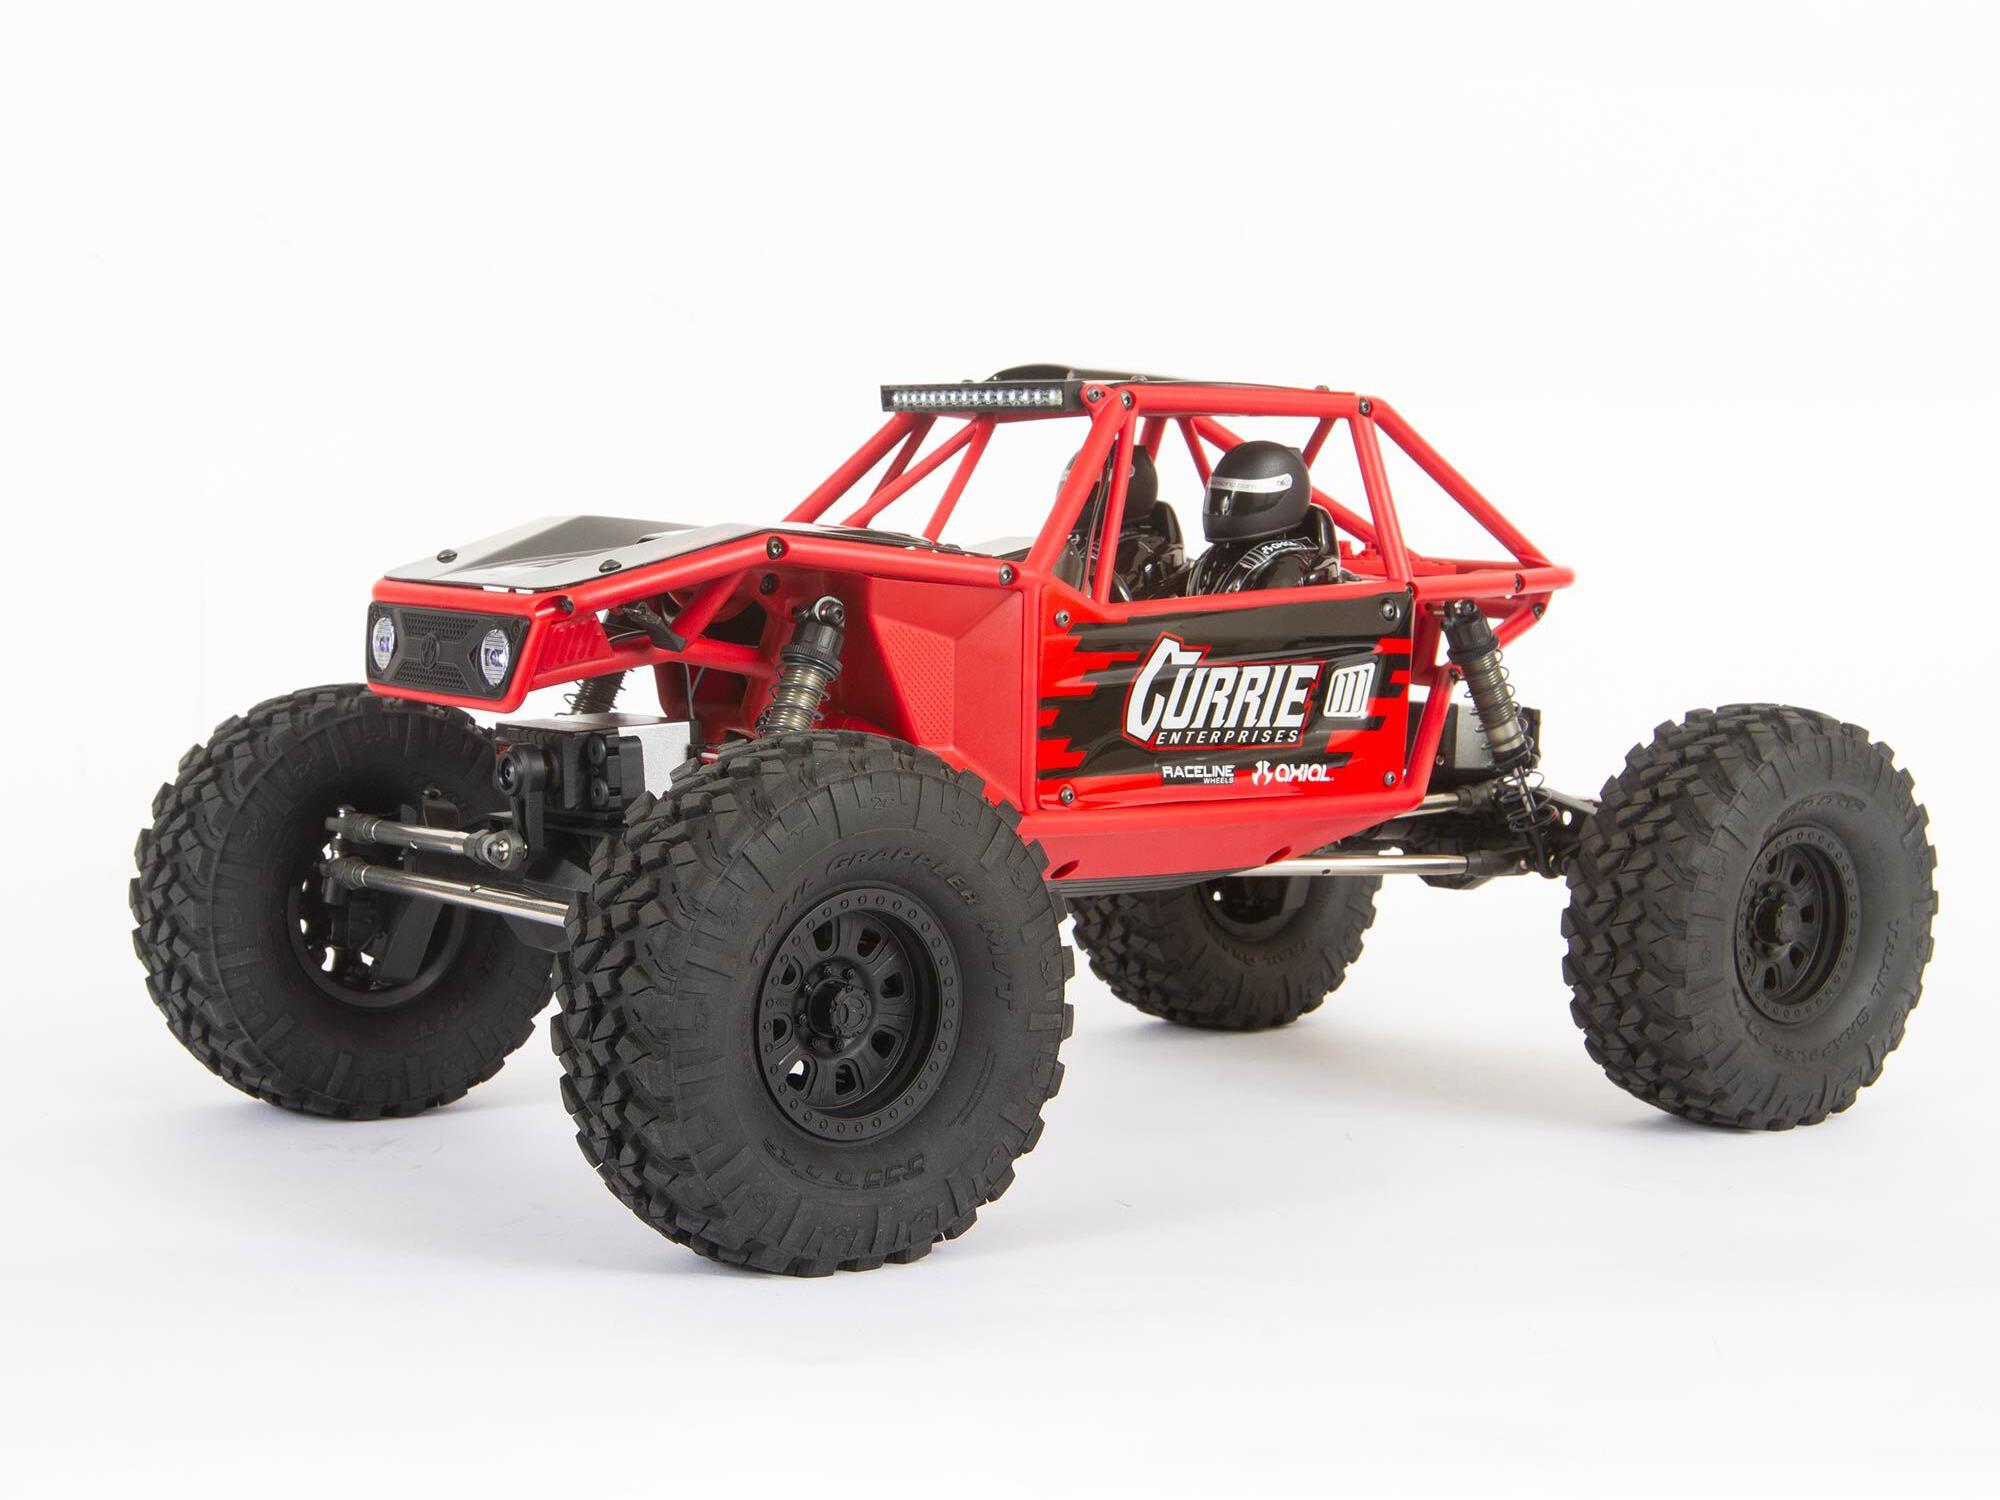 Axial 1/10 Capra 1.9 4WS Unlimited Trail Buggy RTR, Red C-AXI03022BT1